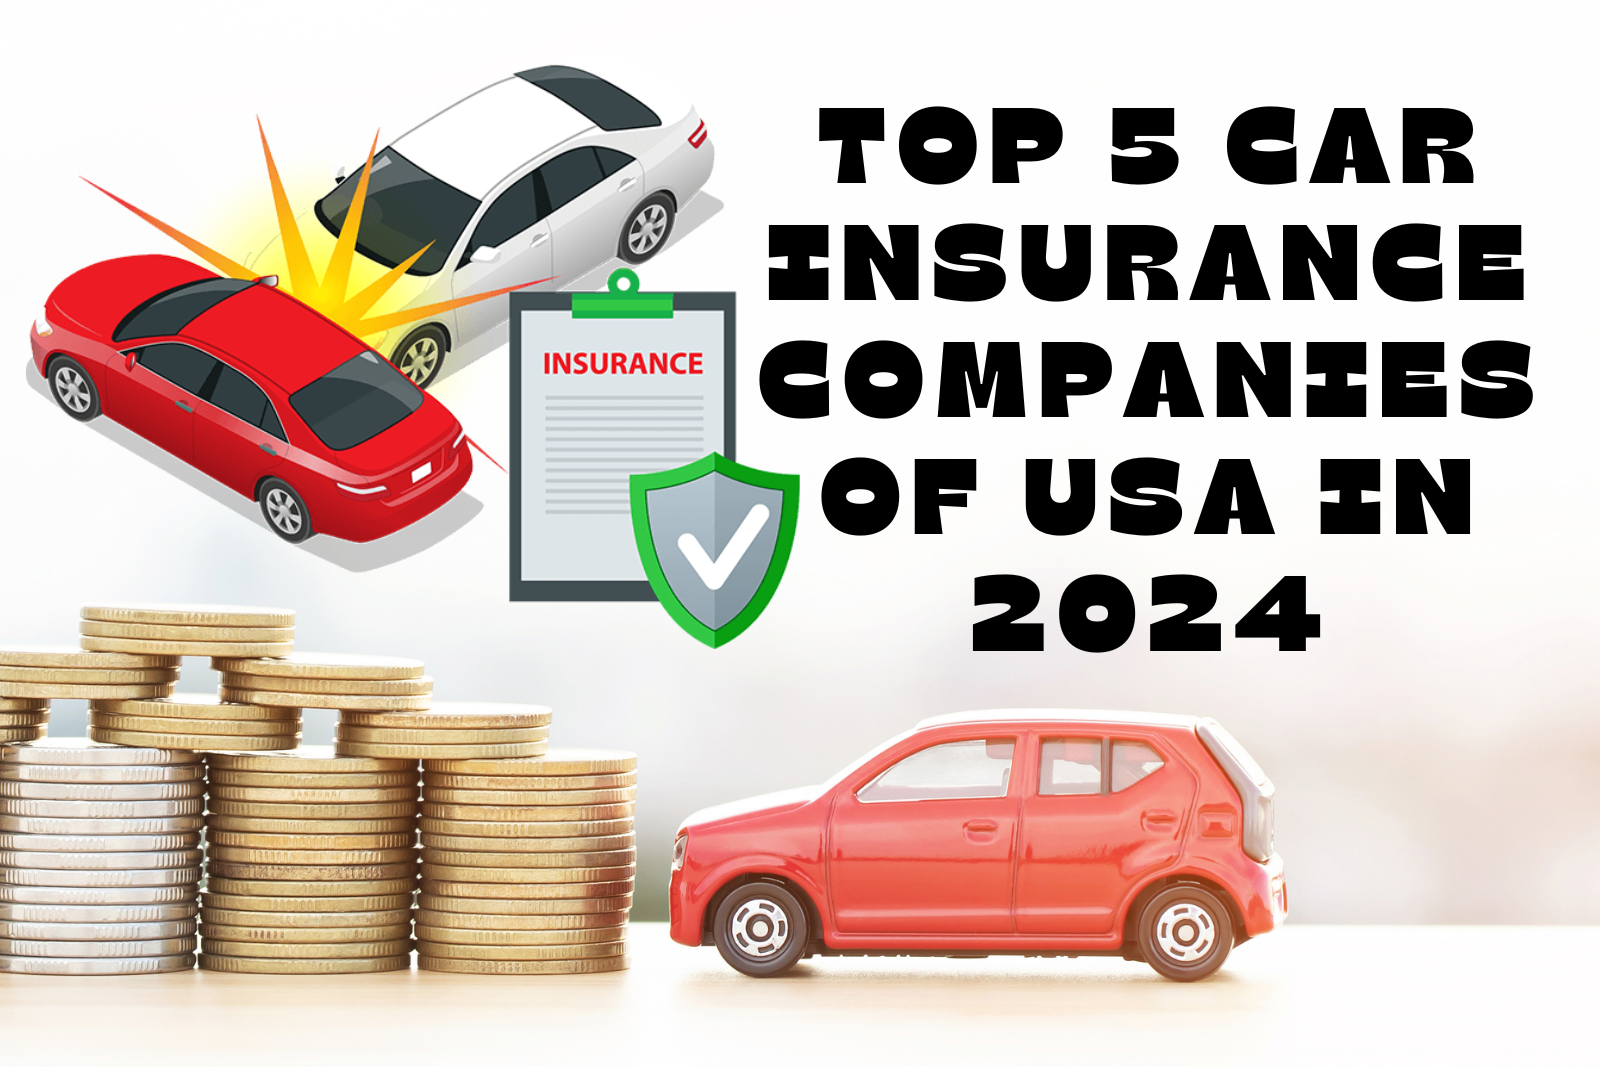 Top 5 Car Insurance Companies of USA in 2024